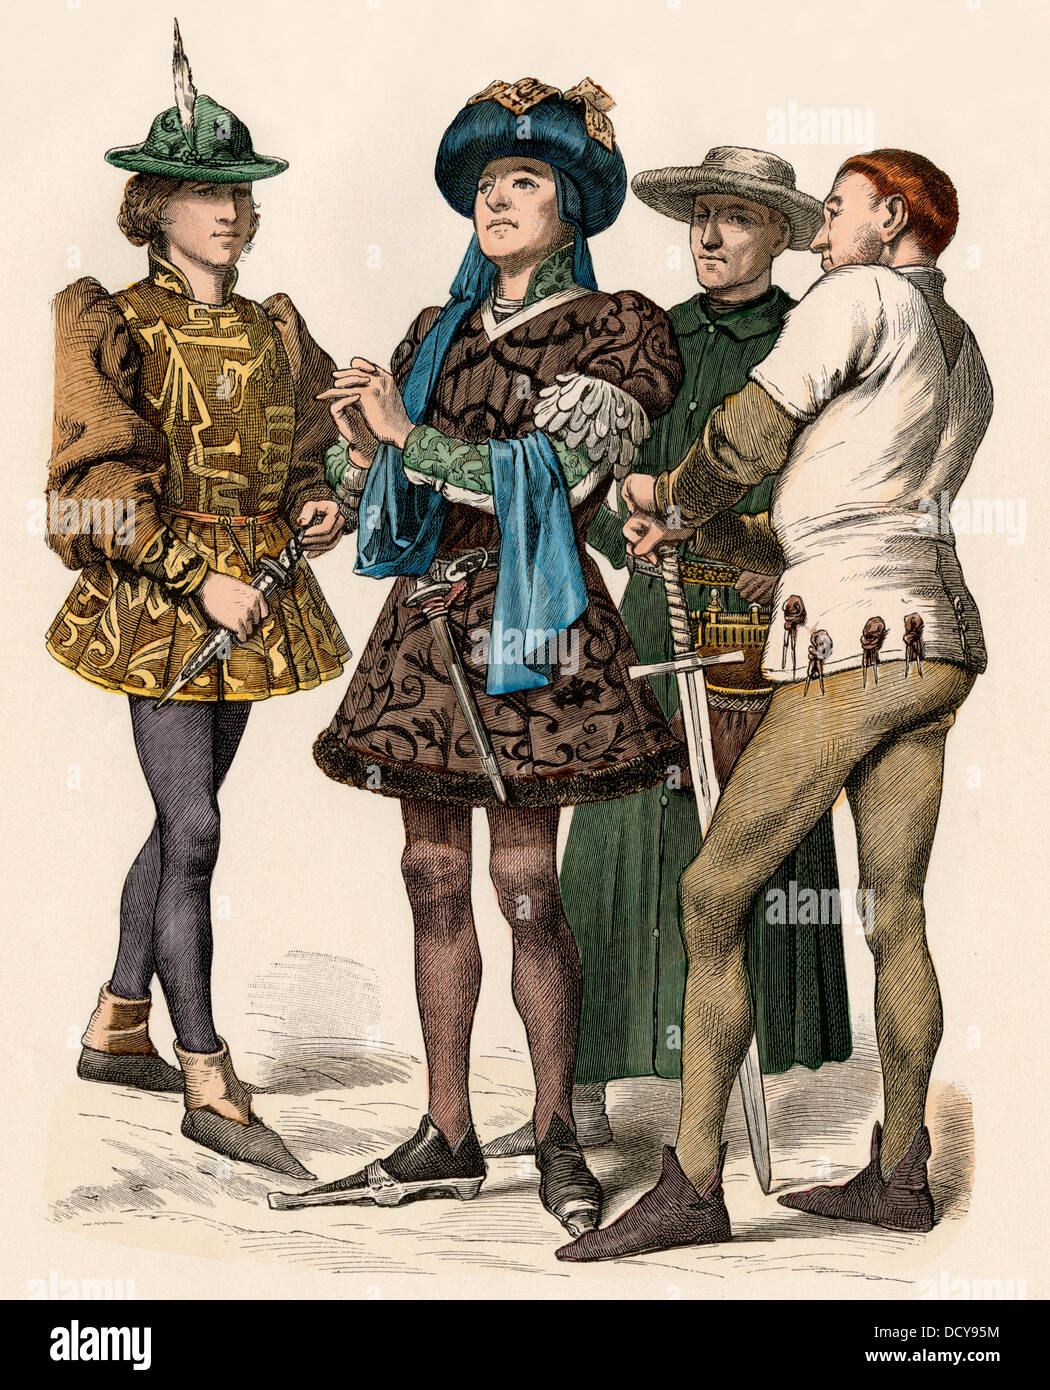 Burgundian nobility in the 1400s. Hand-colored print Stock Photo